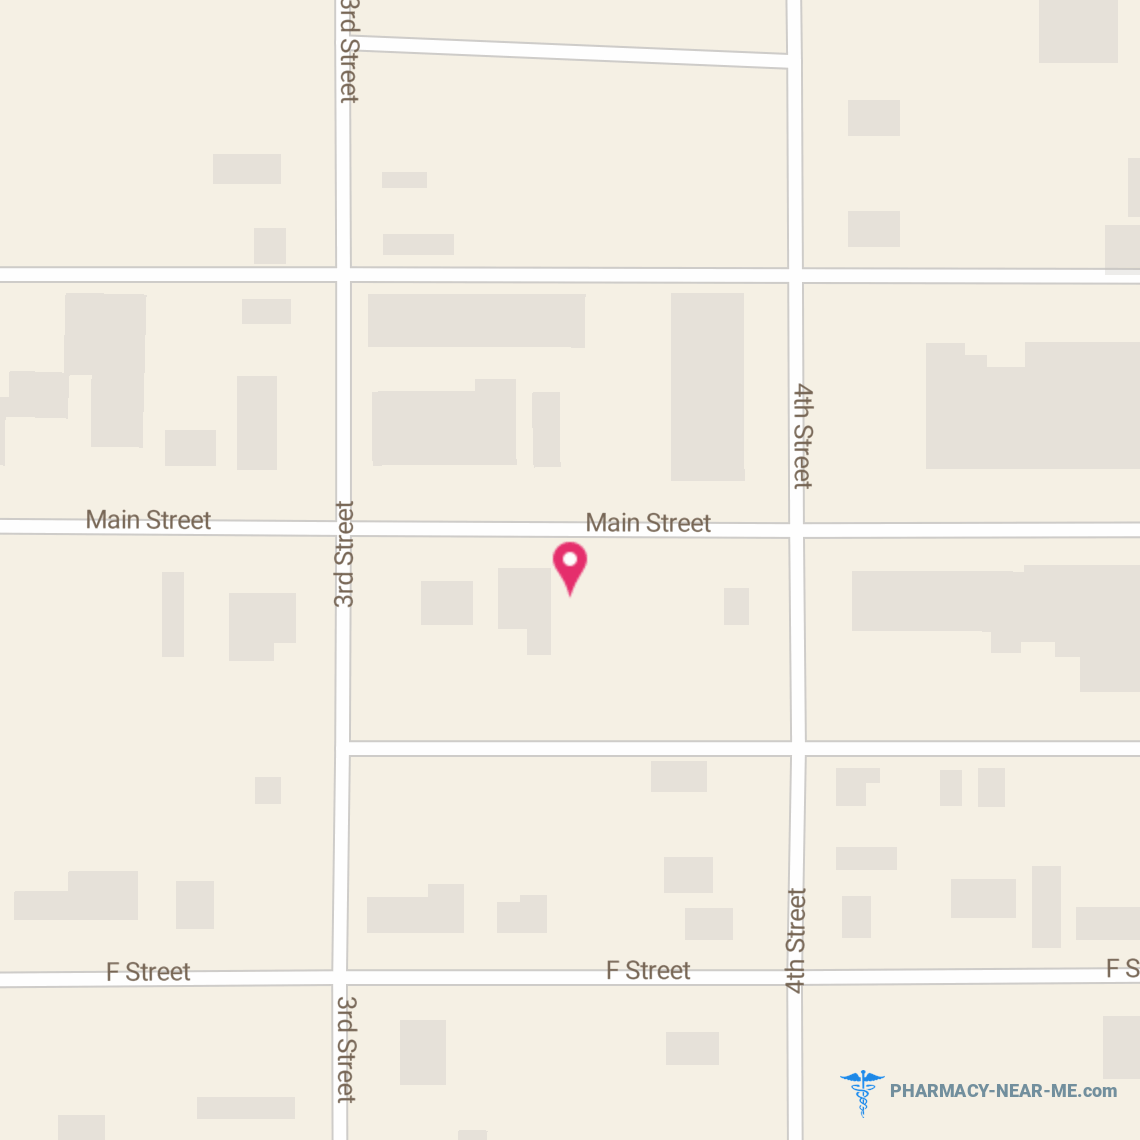 MOORE DRUG INC - Pharmacy Hours, Phone, Reviews & Information: 101 W Main St, Ringling, Oklahoma 73456, United States